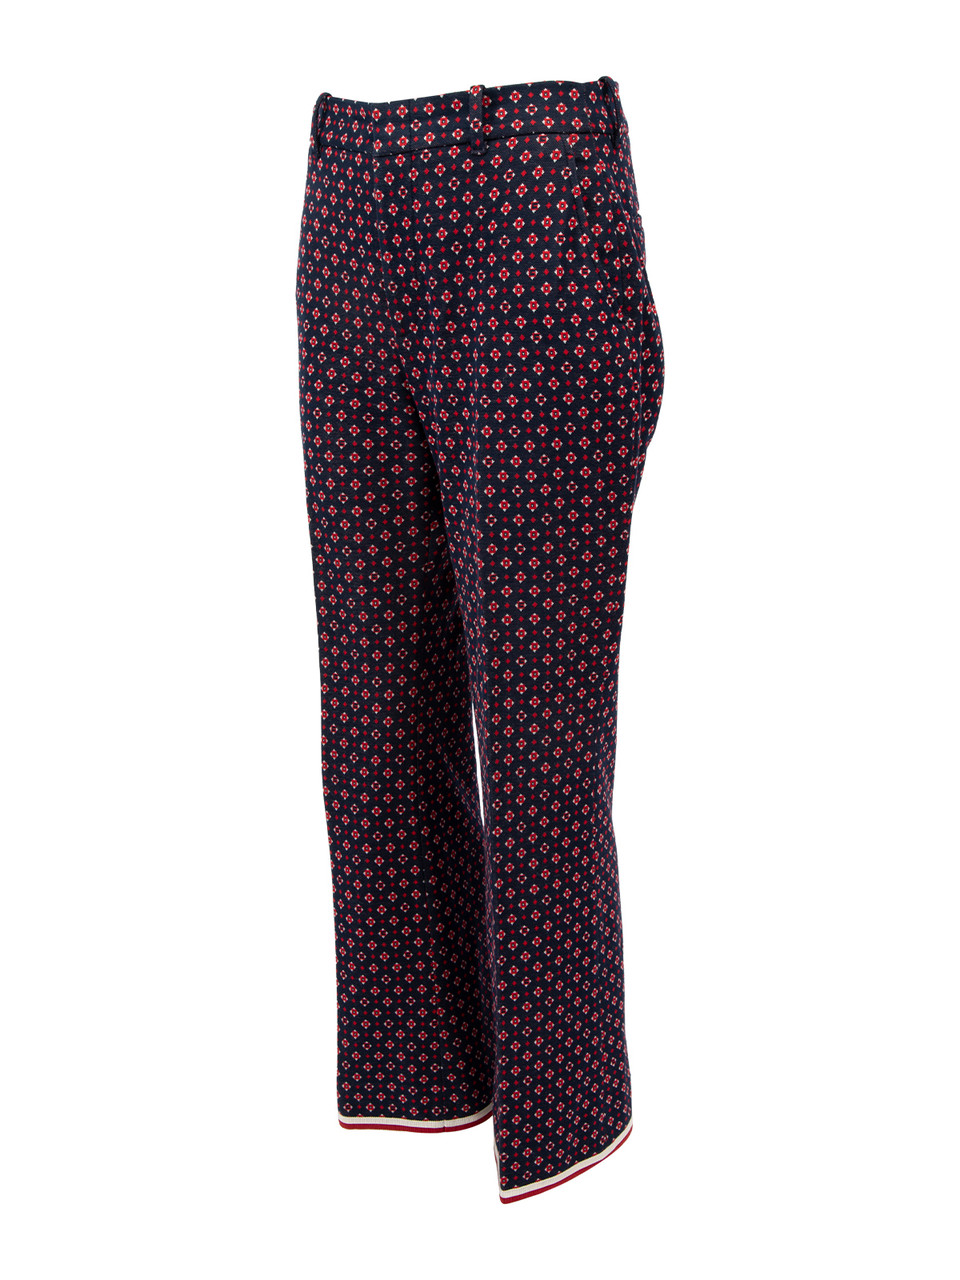 Gucci Navy Patterned Trousers